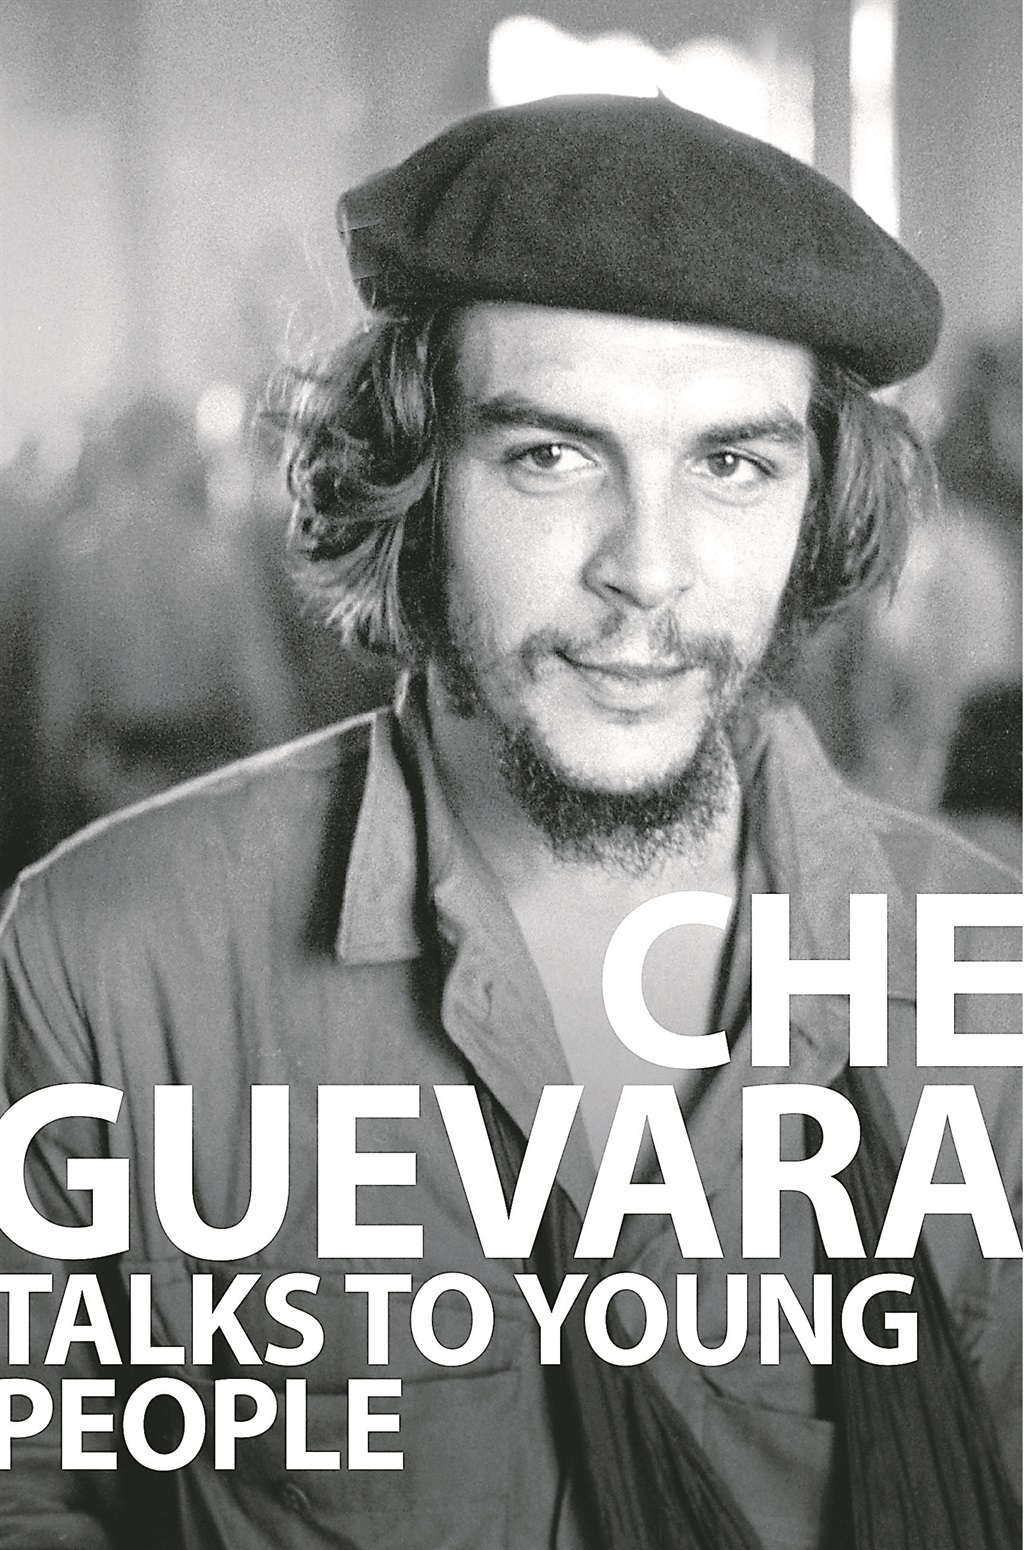 Che Guevara Talks to Young People by Ernesto Che Guevara 